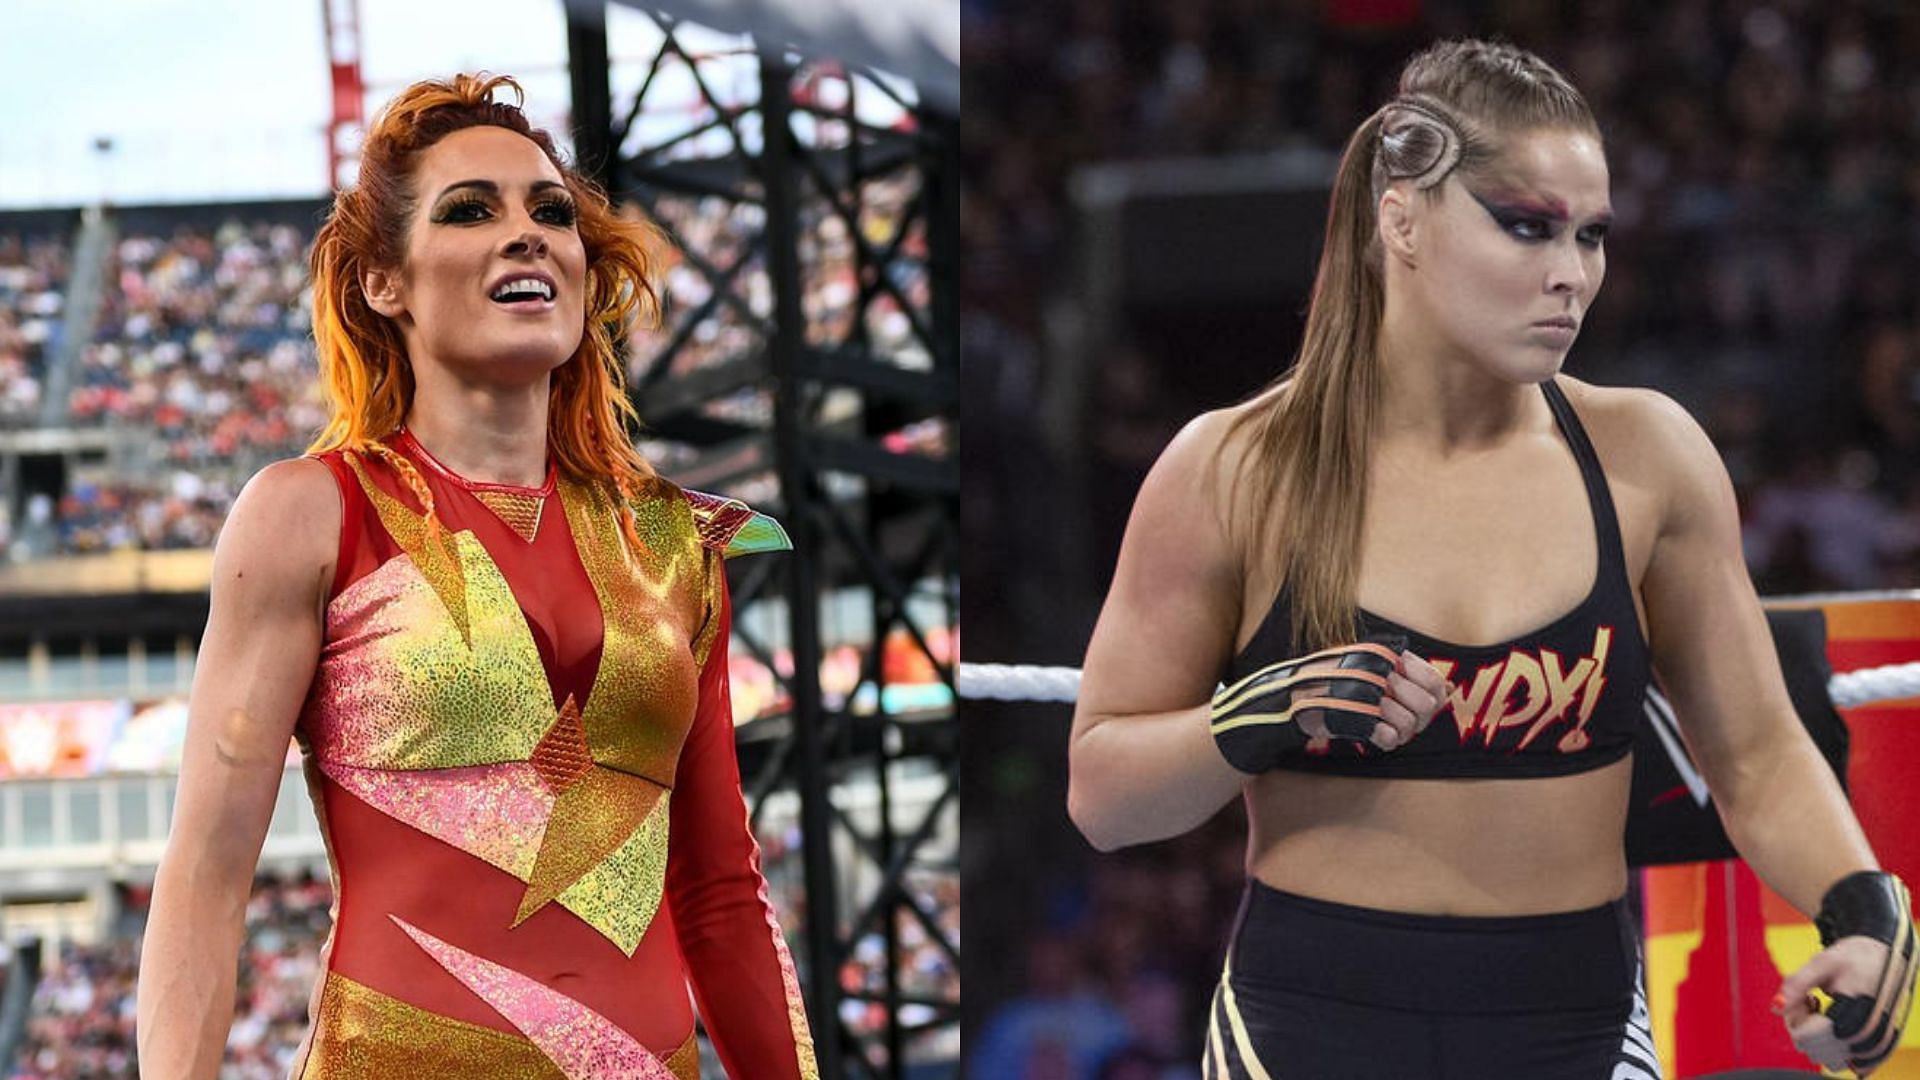 Ronda Rousey &amp; Becky Lynch had character changes at WWE SummerSlam